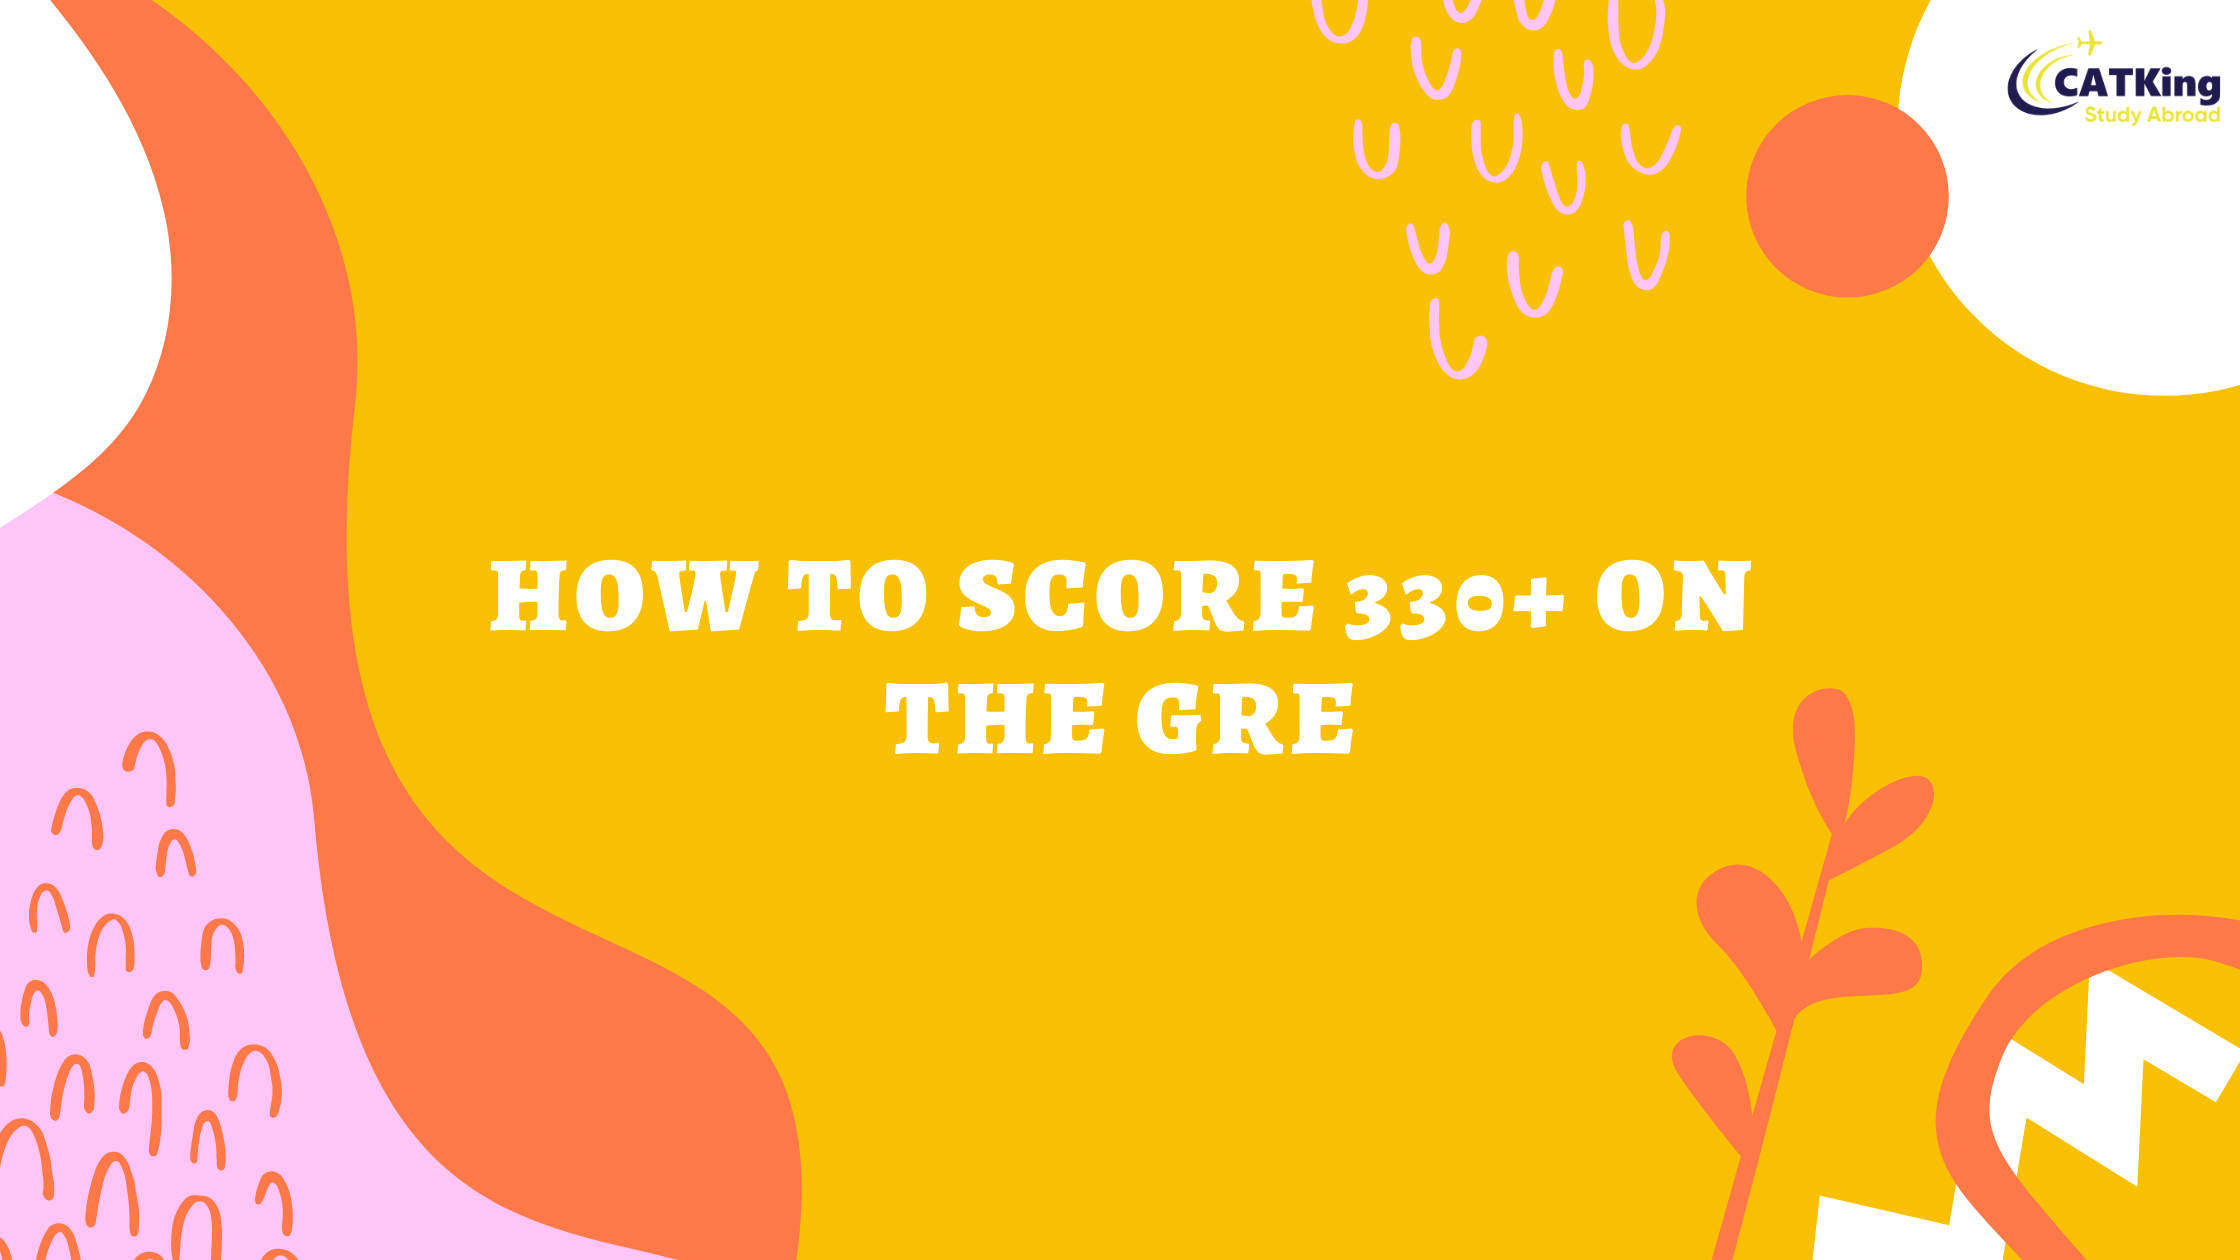 How to Score 330+ on the GRE